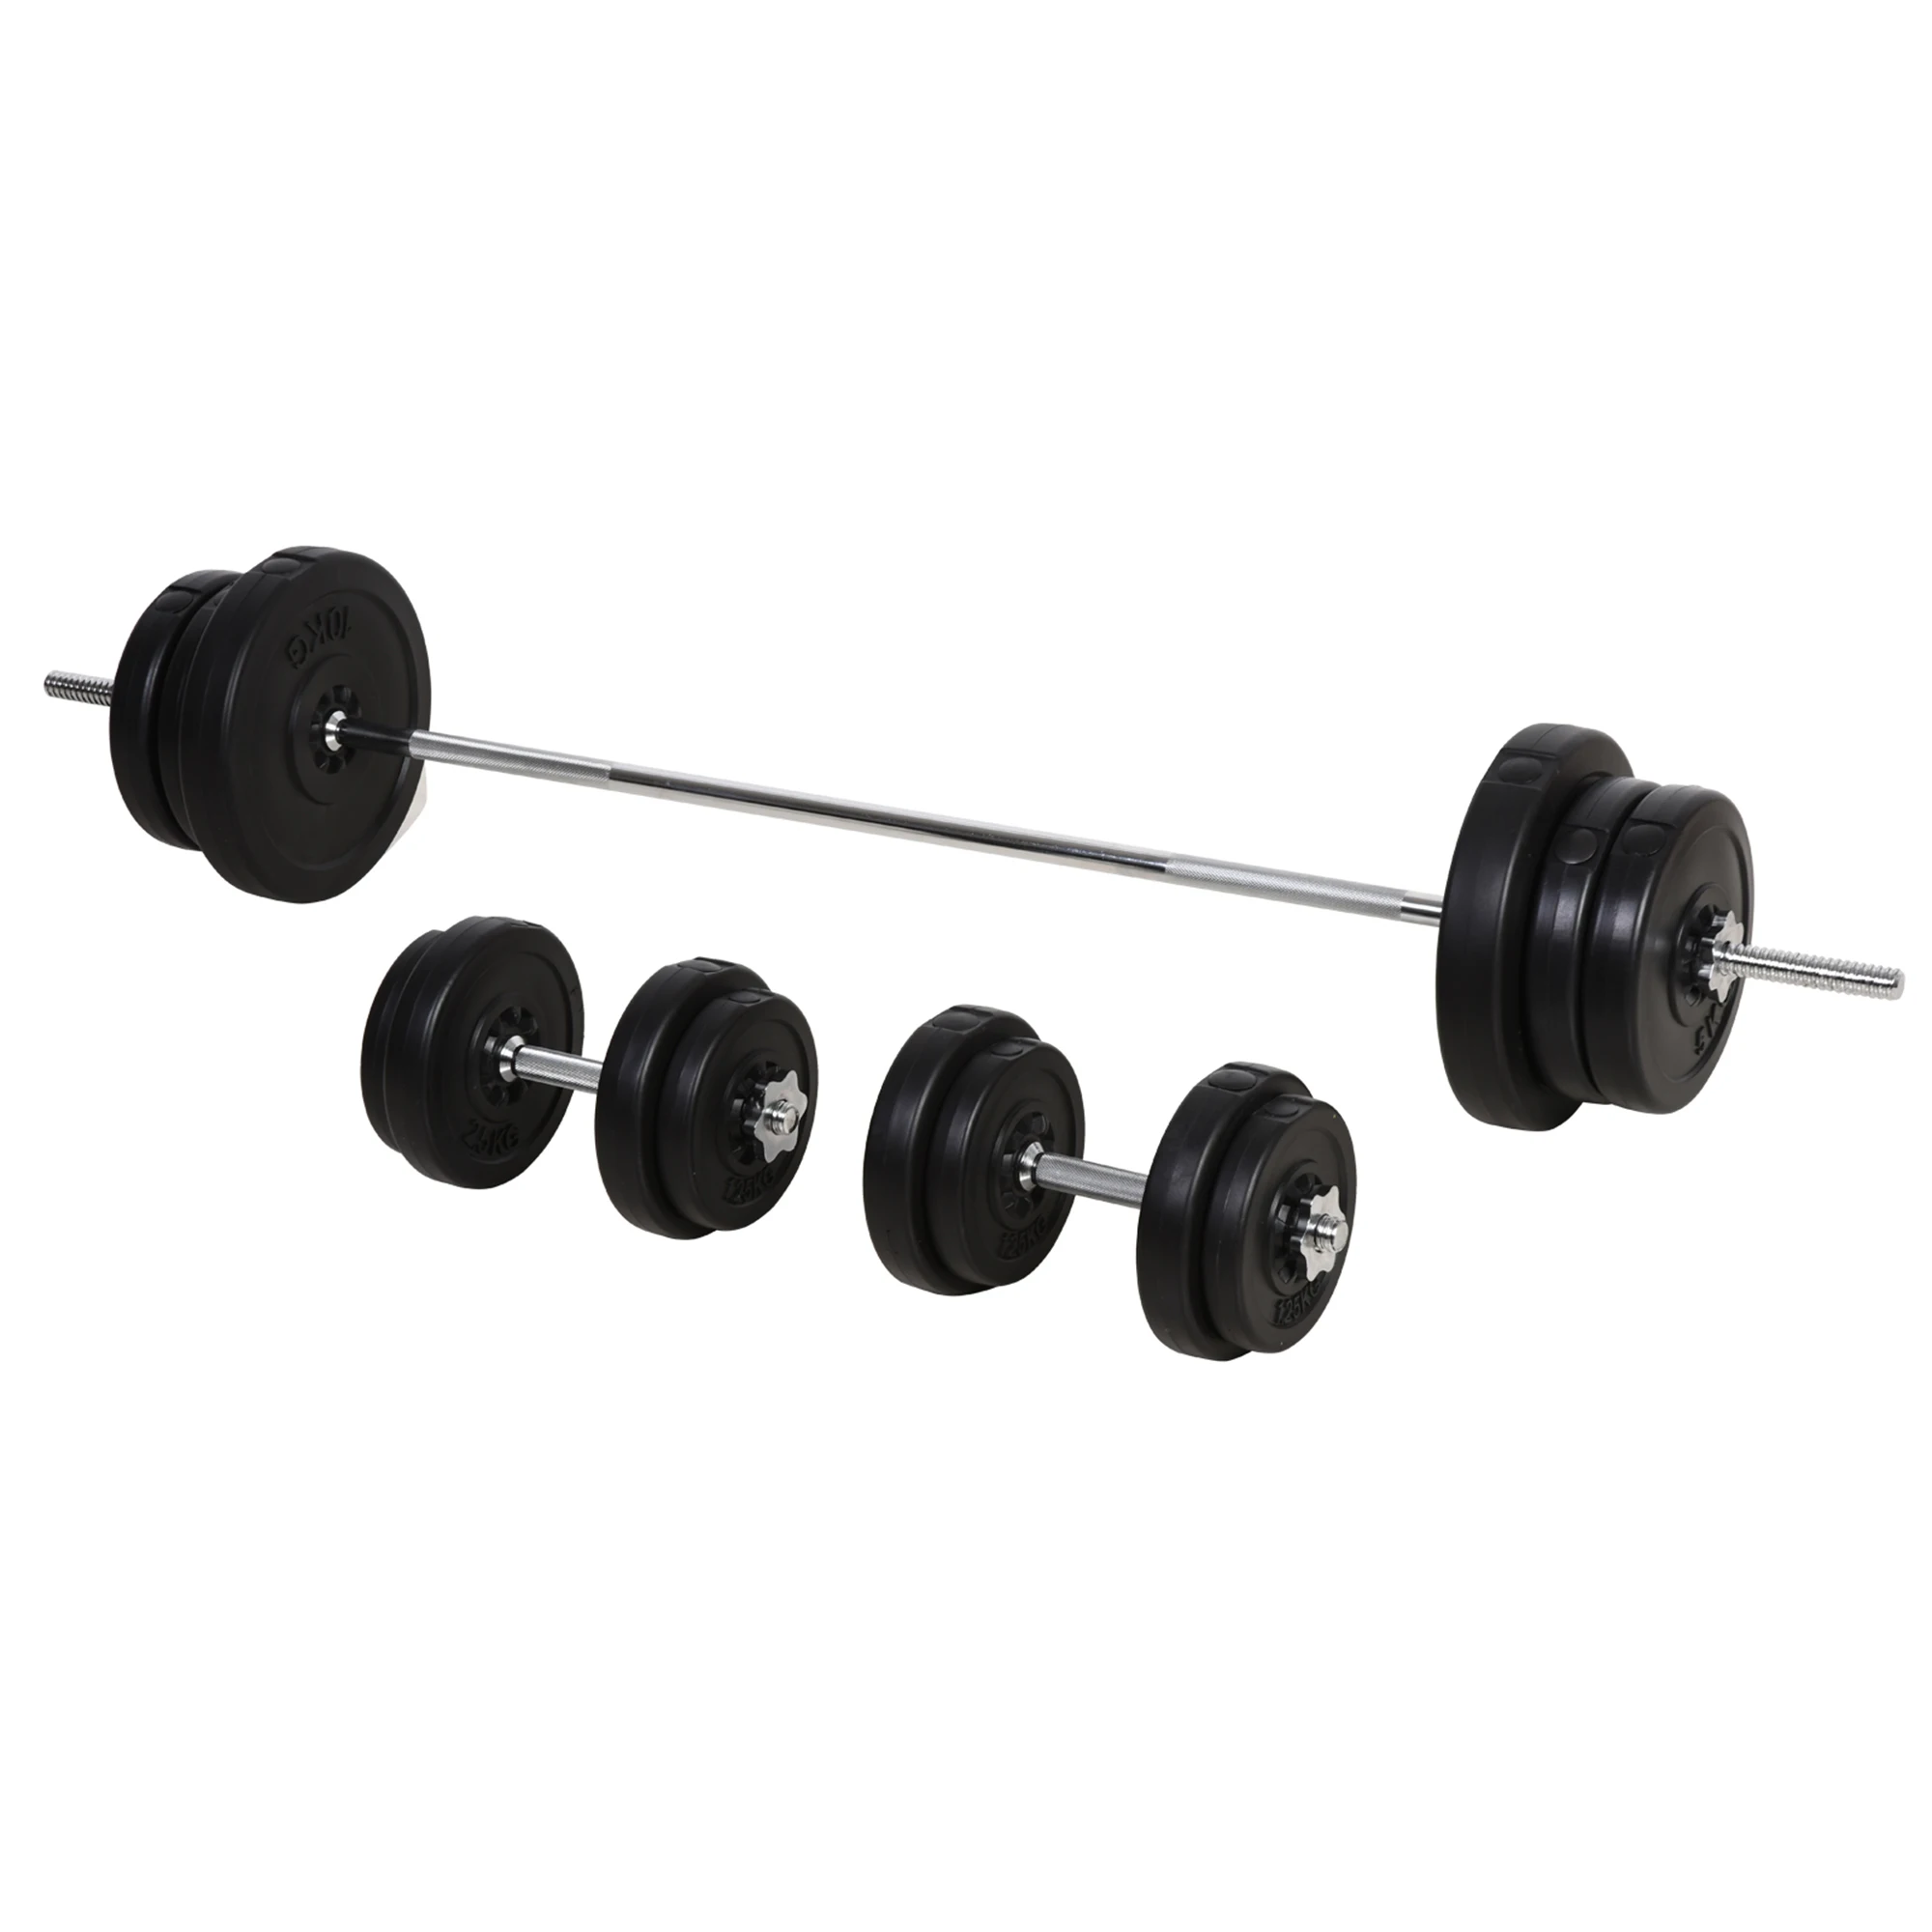 Adjustable Dumbbell Set Fitness Weight Set For Gym Home Single Juego De Pesas 